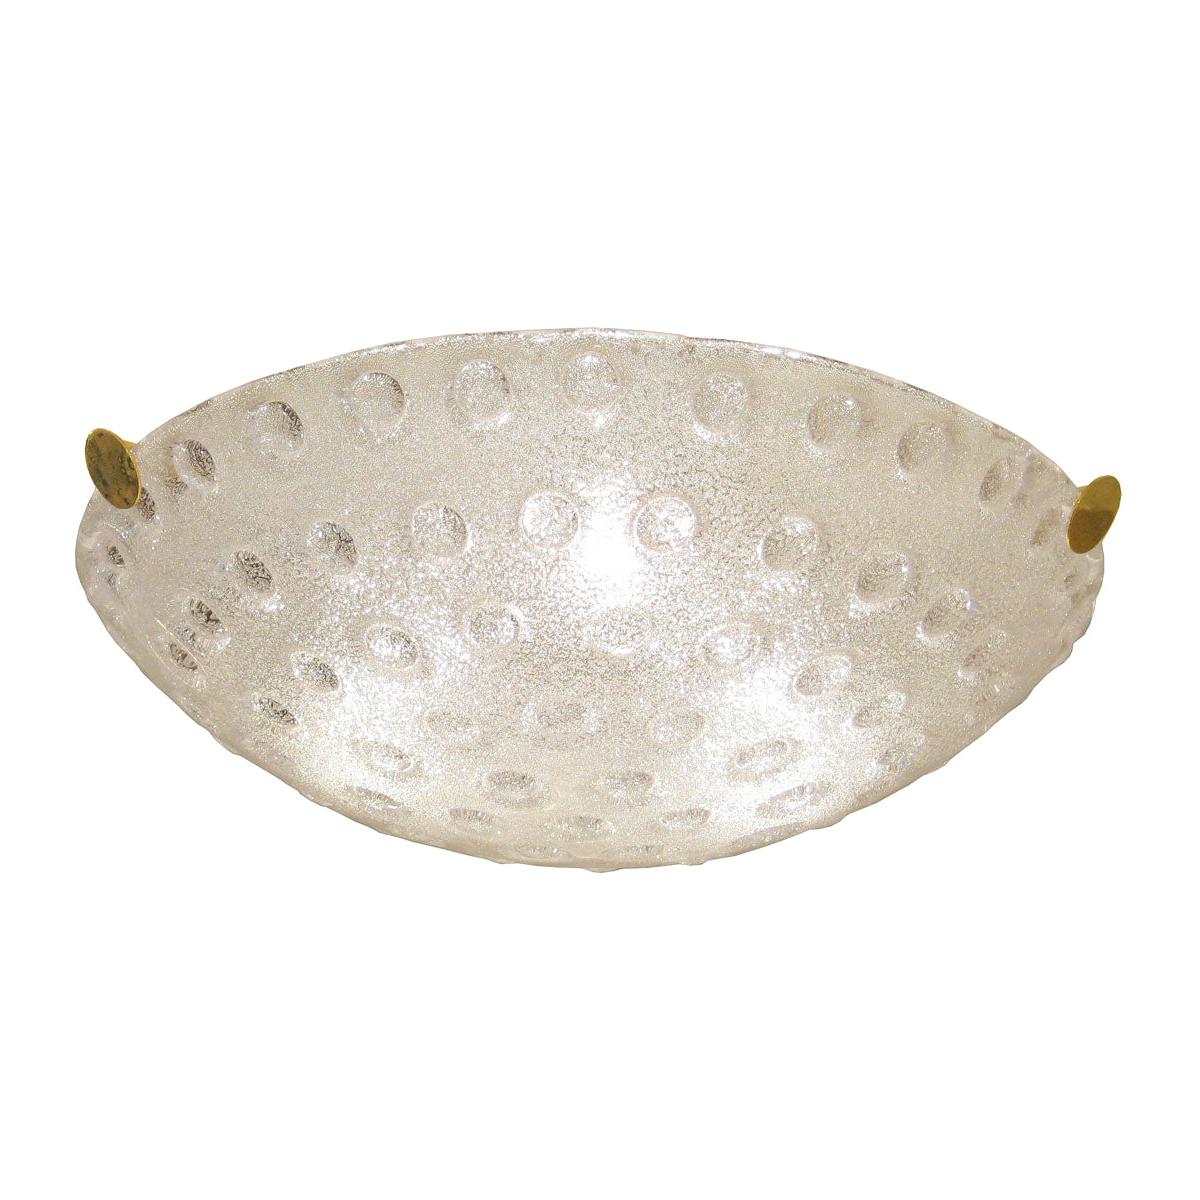 Frosted Murano Glass Dome Form Flush Mount Ceiling Fixture with Bubble Detail